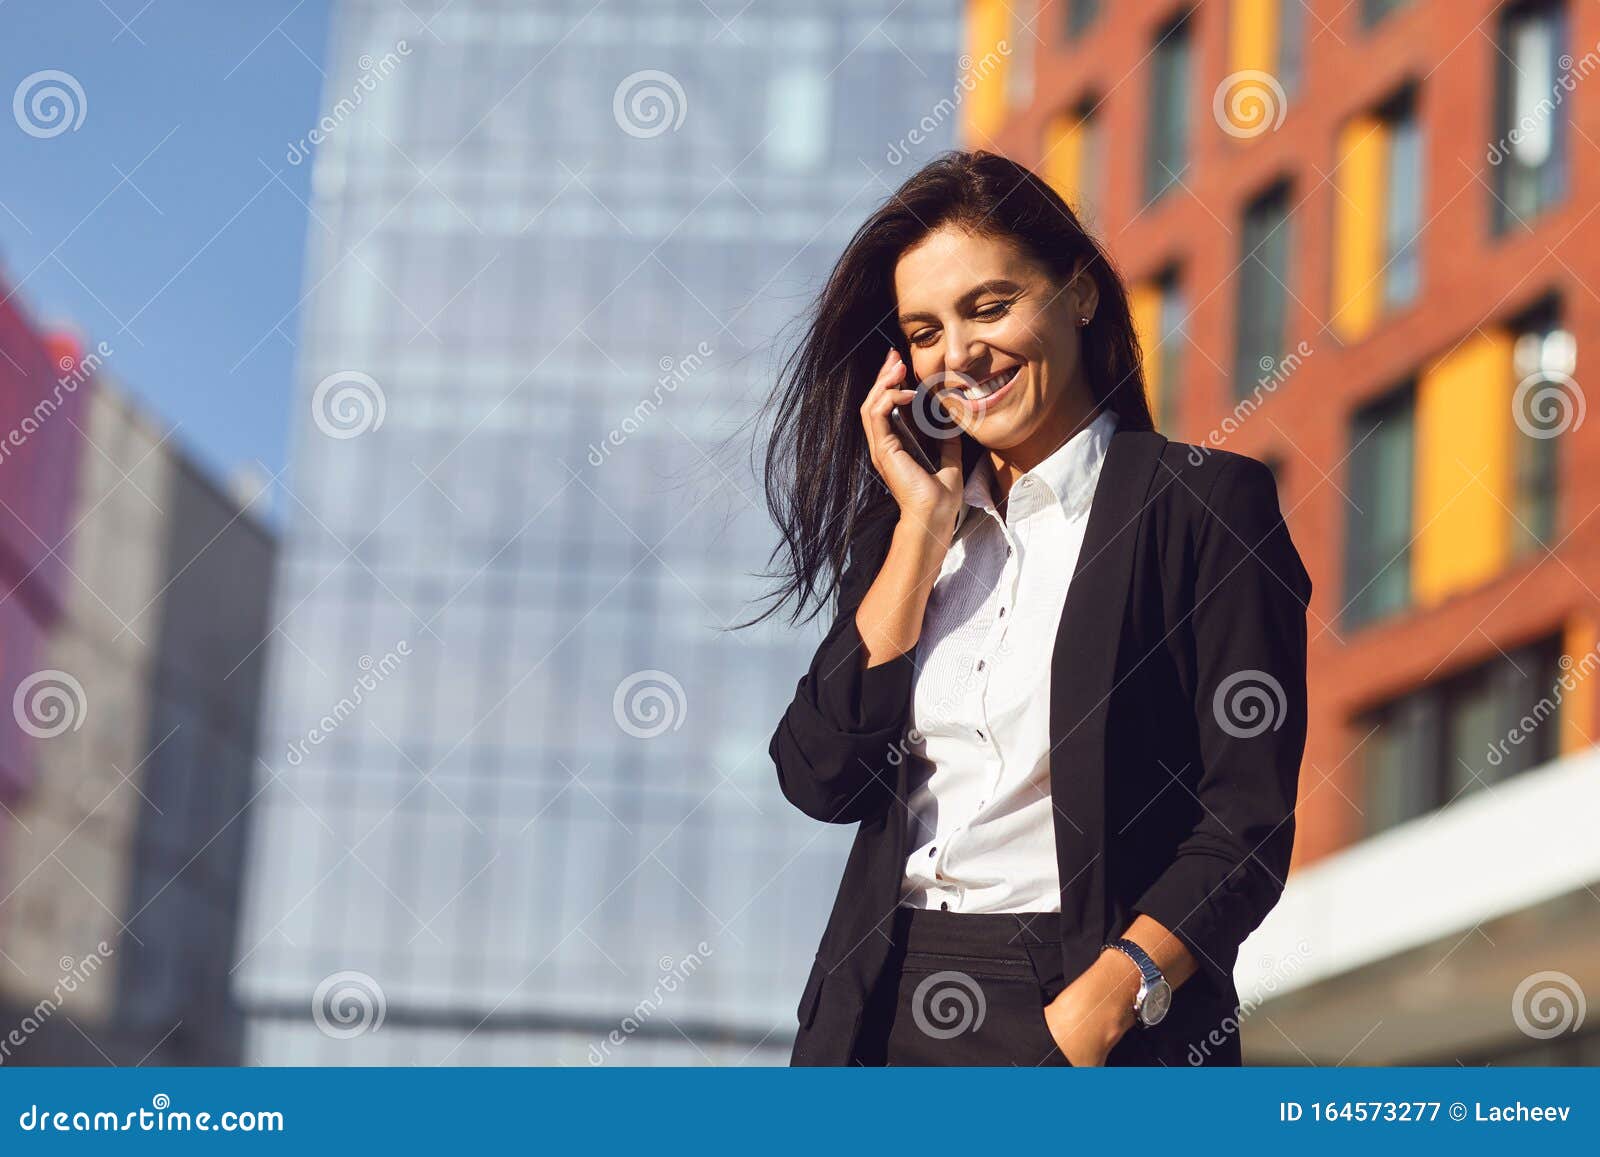 Hispanic Businesswoman Smiling Speaks on a Mobile Outdoors Stock Image ...